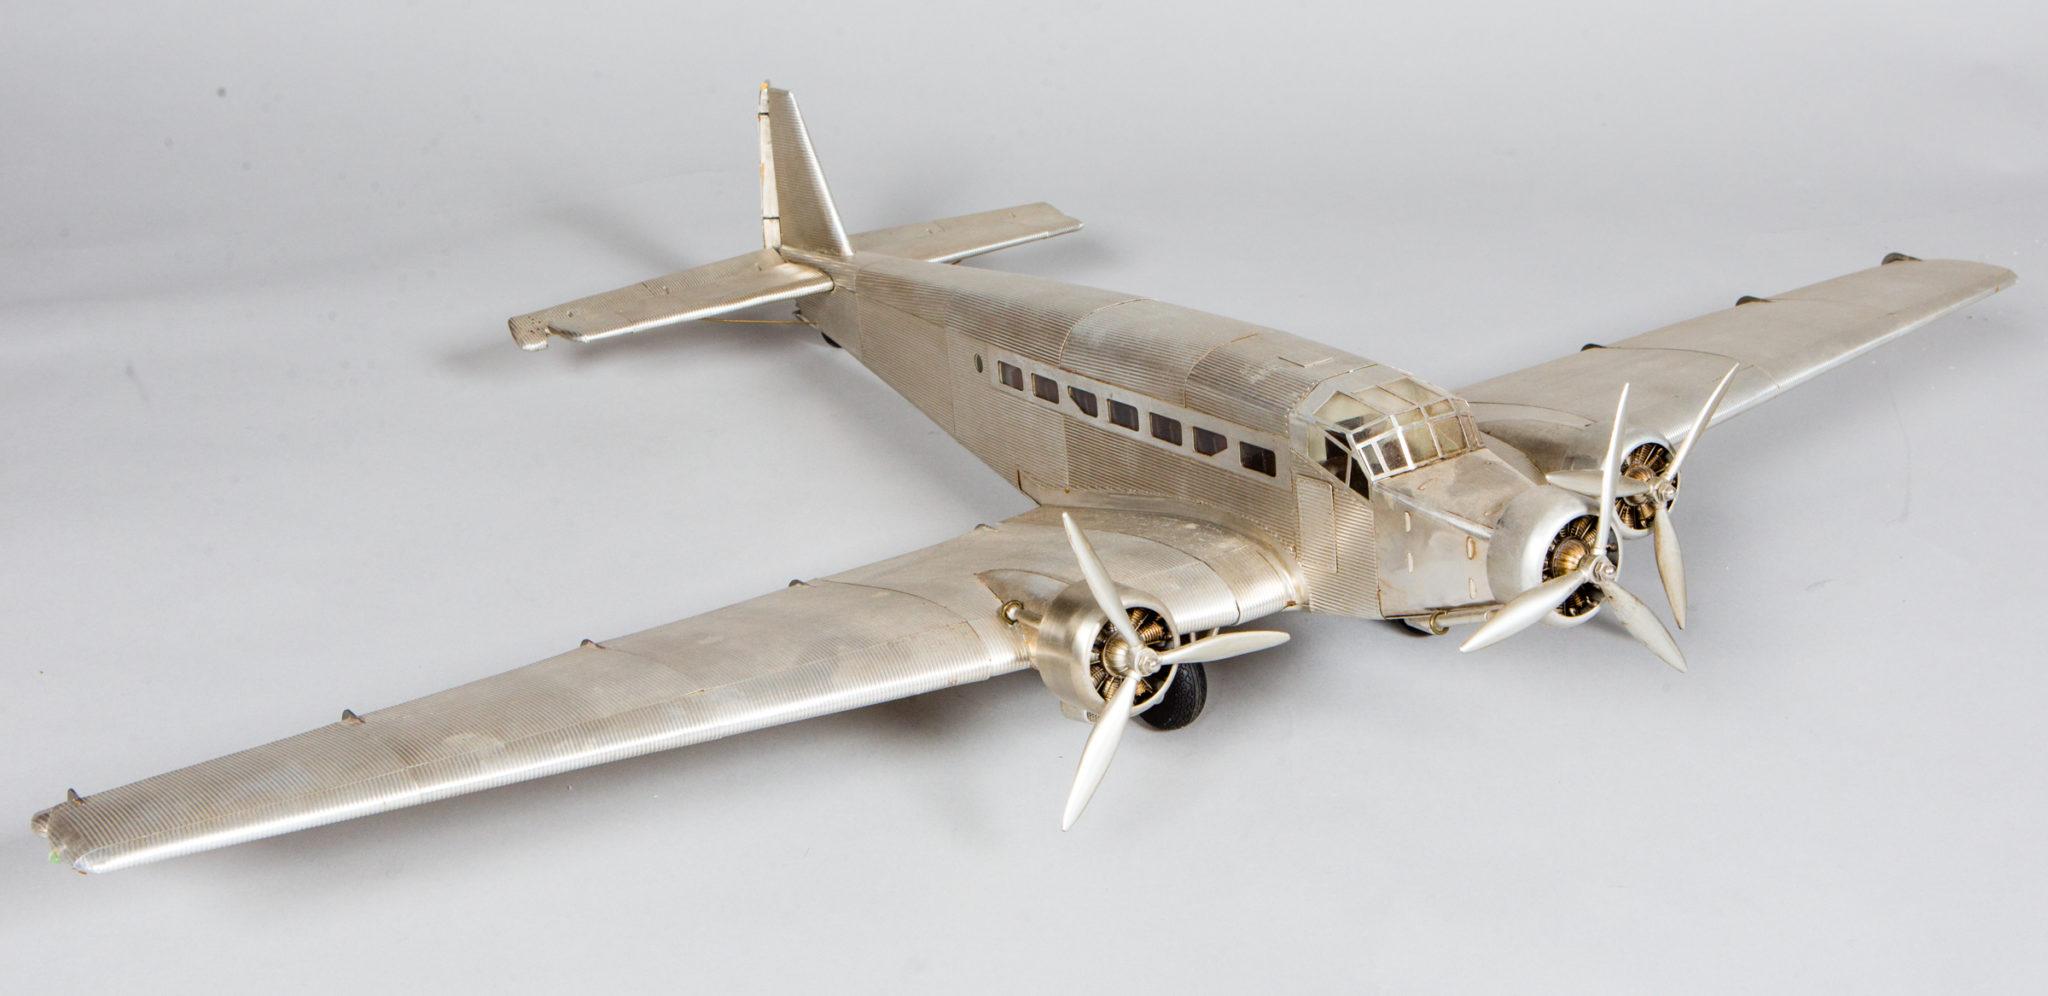 Metal model airplane with articulating control surfaces and propellers.